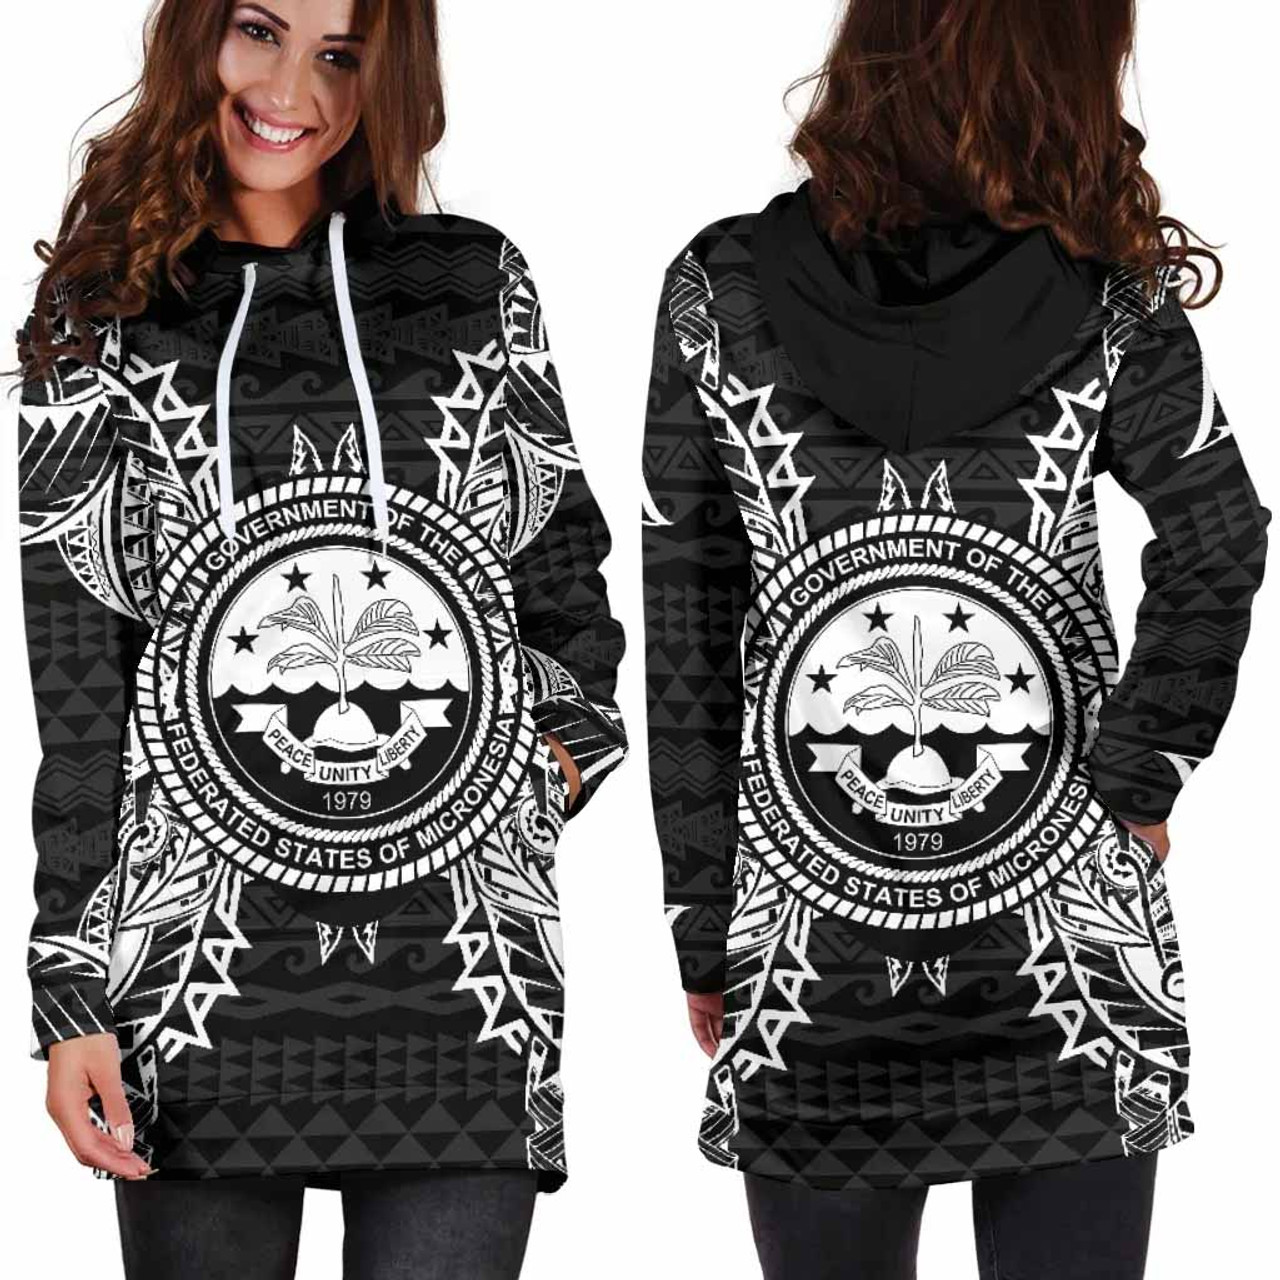 Federated States Of Micronesian Hoodie Dress Map Black 2